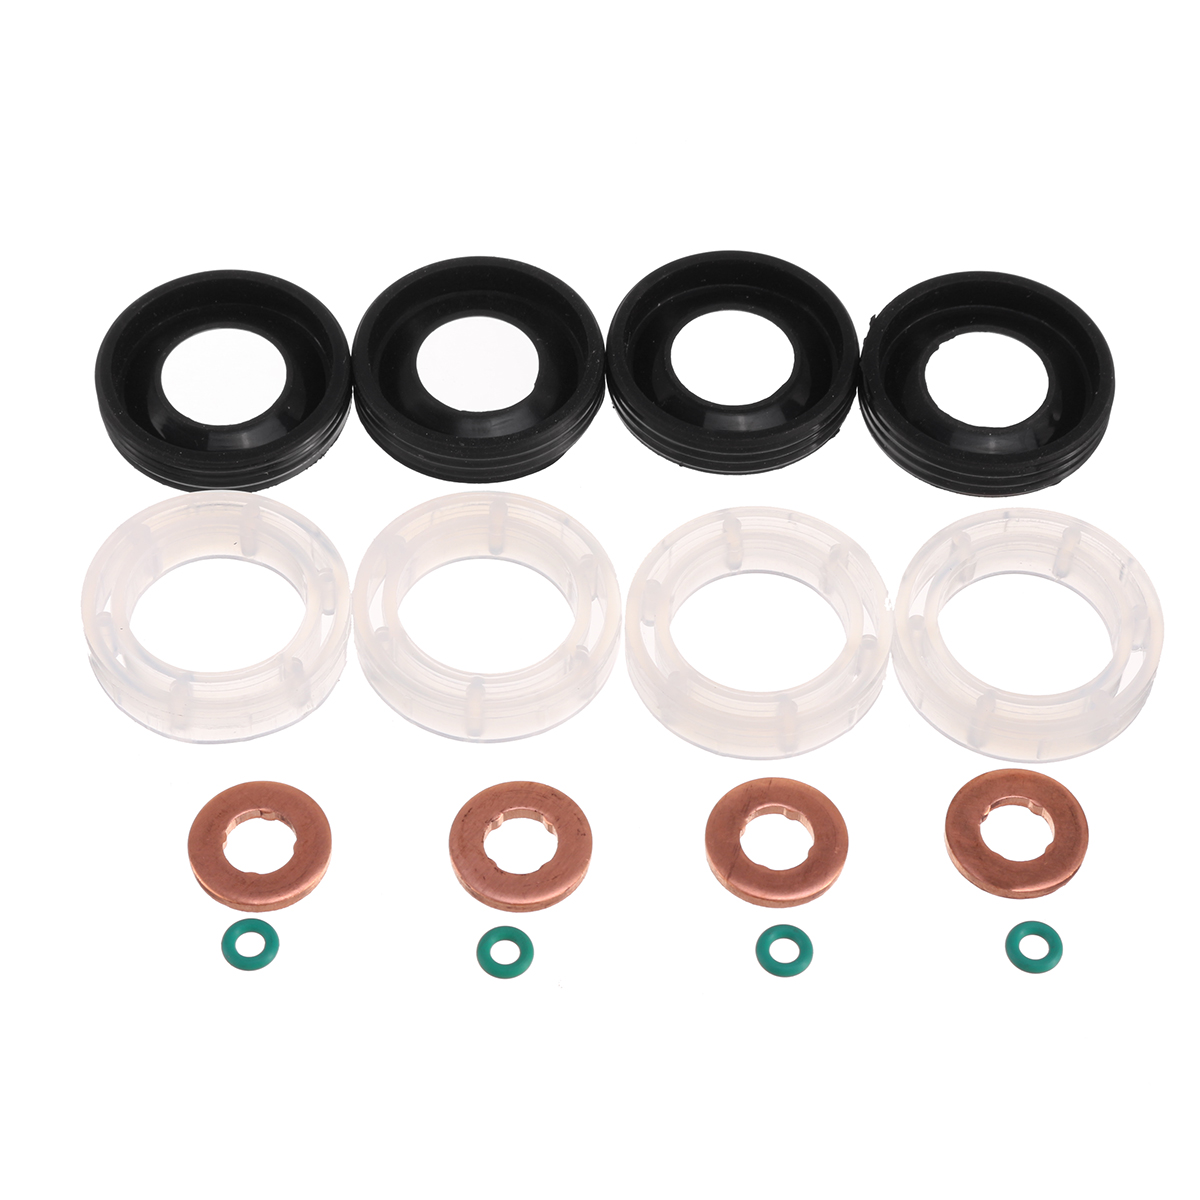 Fuel Injector Seal Washer O-Ring Kit for Citroen DISPATCH 1.6 HDI 2002 on